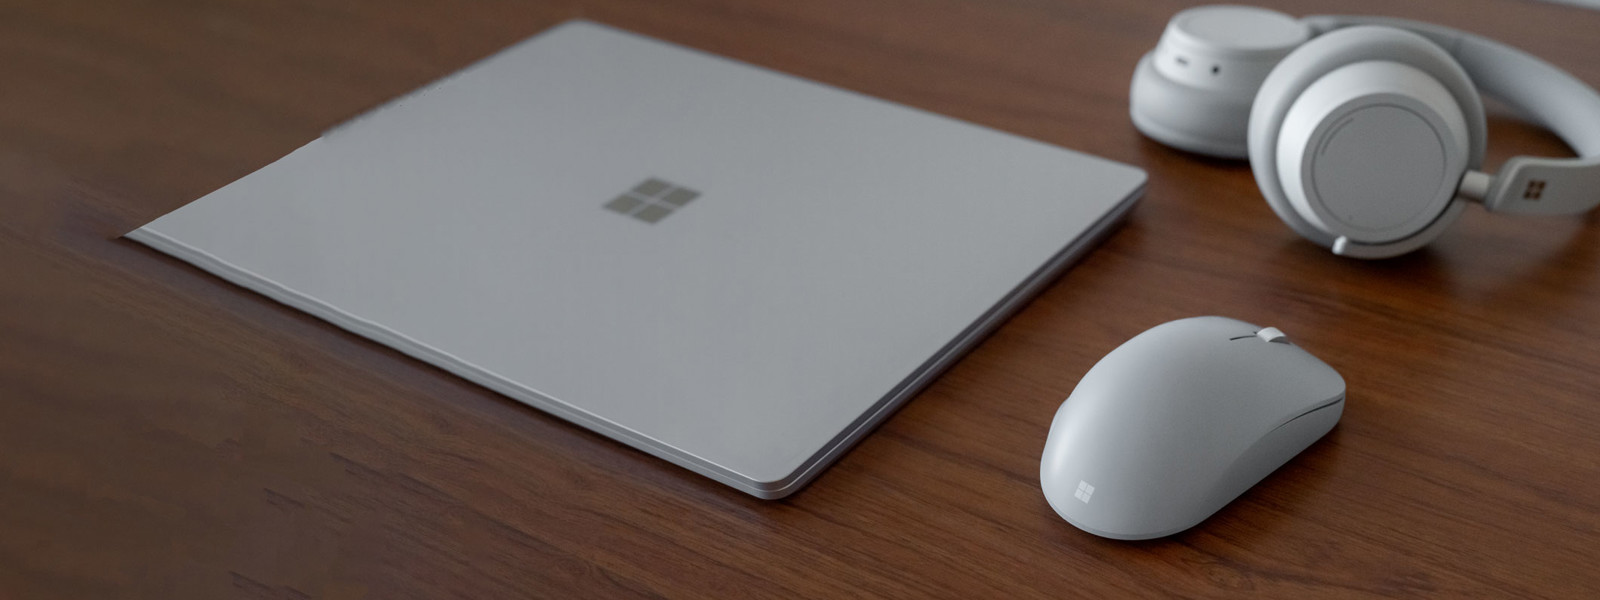 A Surface laptop, mouse, and headphones on a desk.